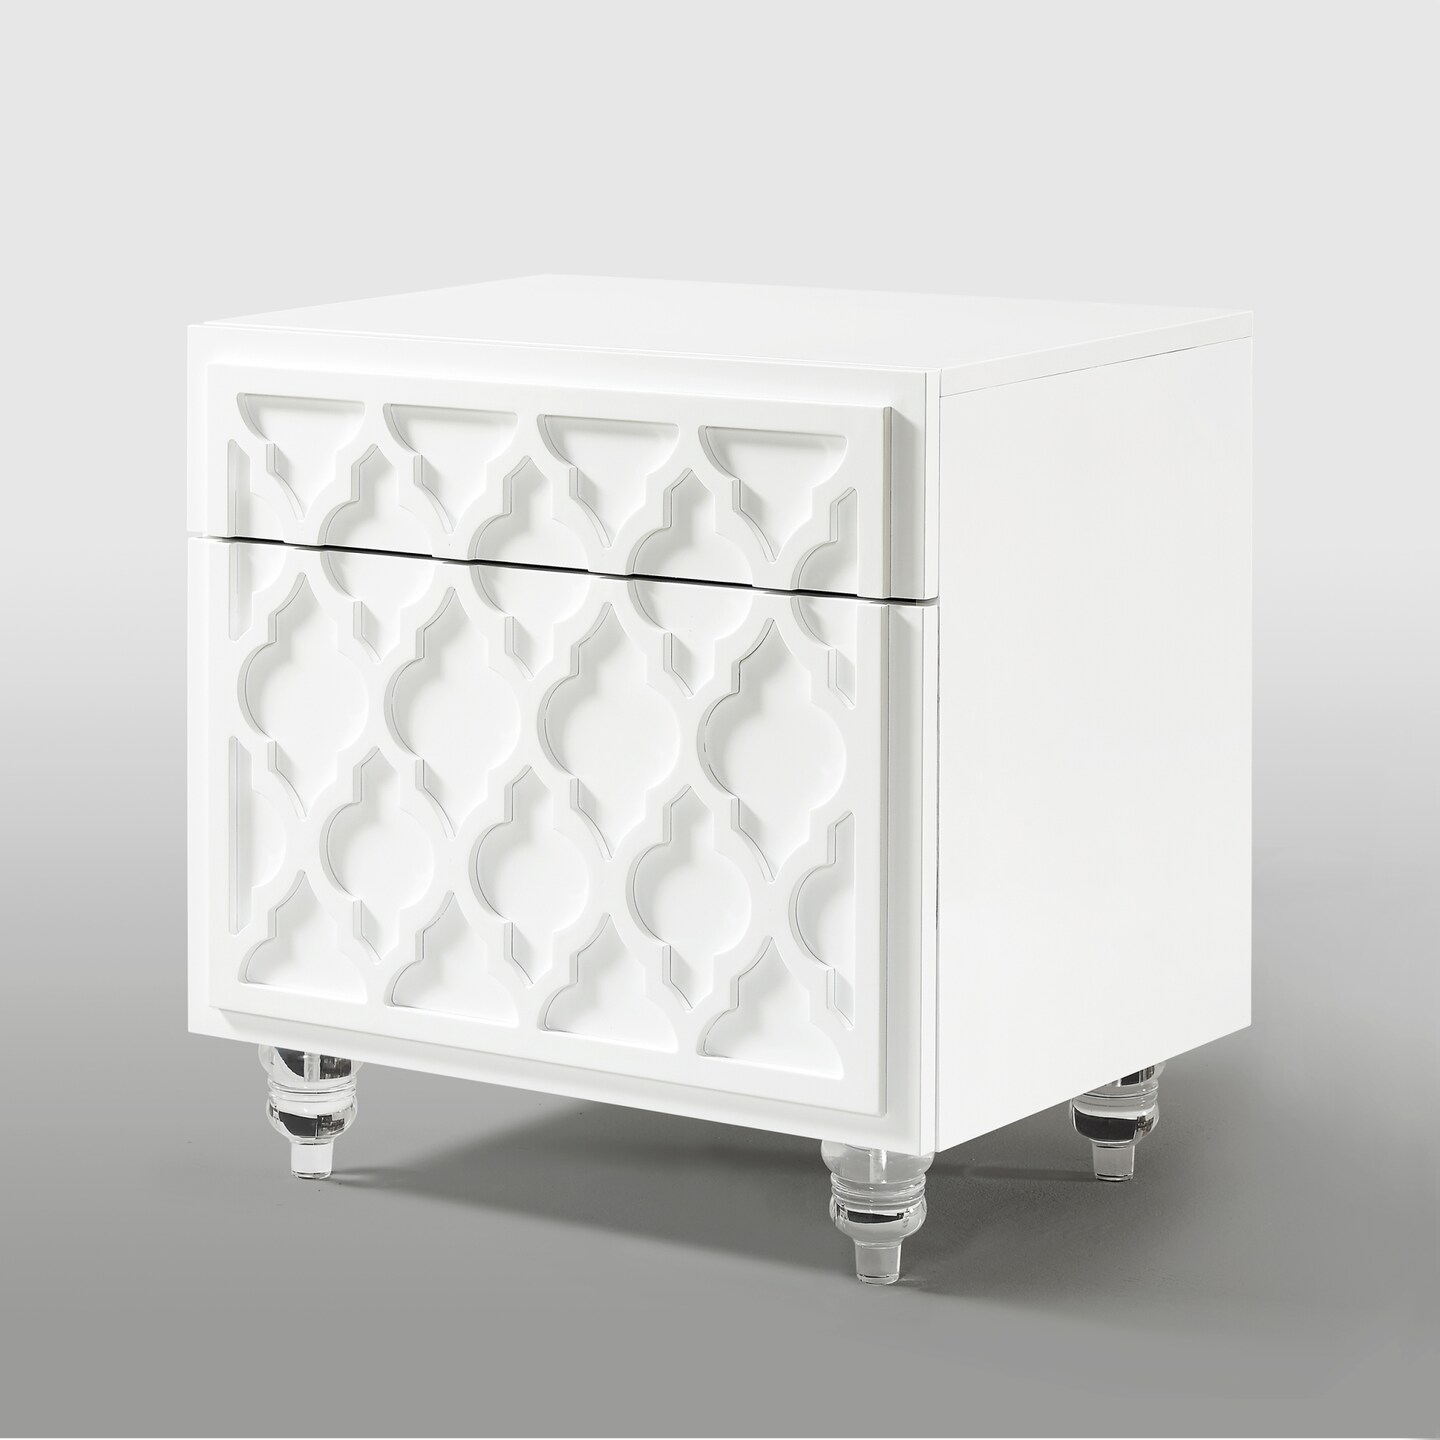 Keira Modern Trellis Lacquered Lucite Leg Side/Accent Table/ Nightstand